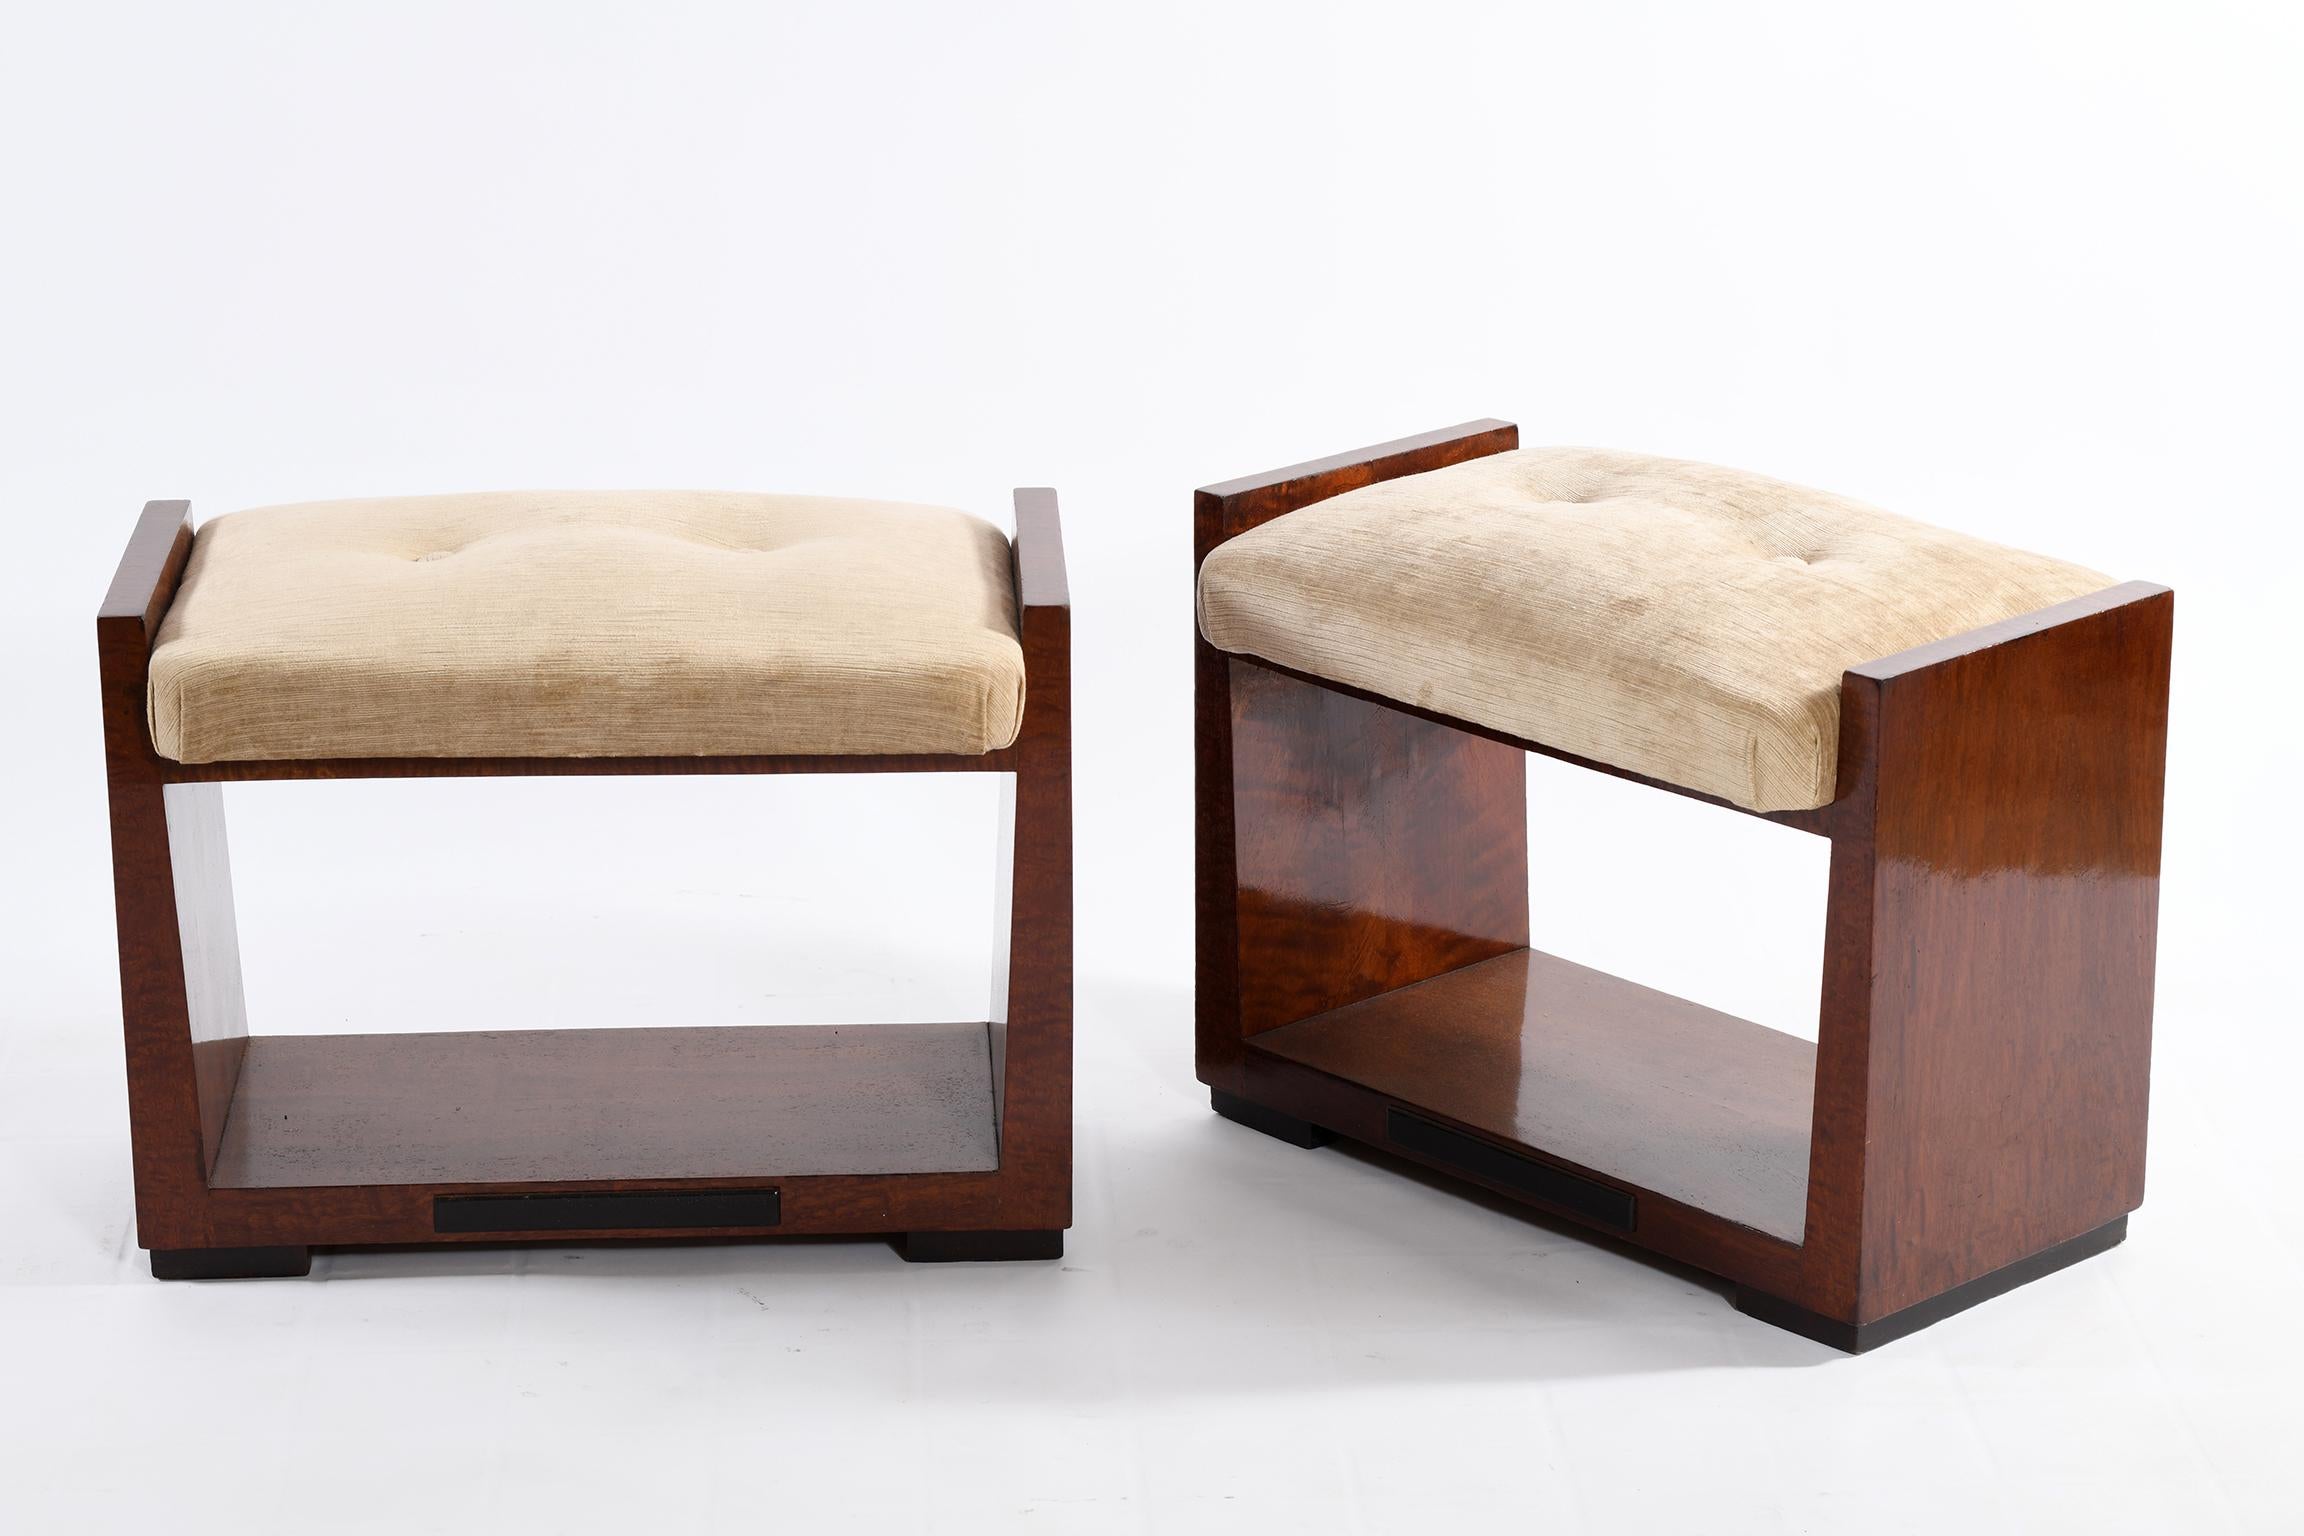 Pair of square U-shaped Italian stools with the upper part of the seat
padded and covered with a new velvet, they were made in the Art Deco 1930s period using a luxurious and precious exotic wood.
The combination of the elegant and simple shape